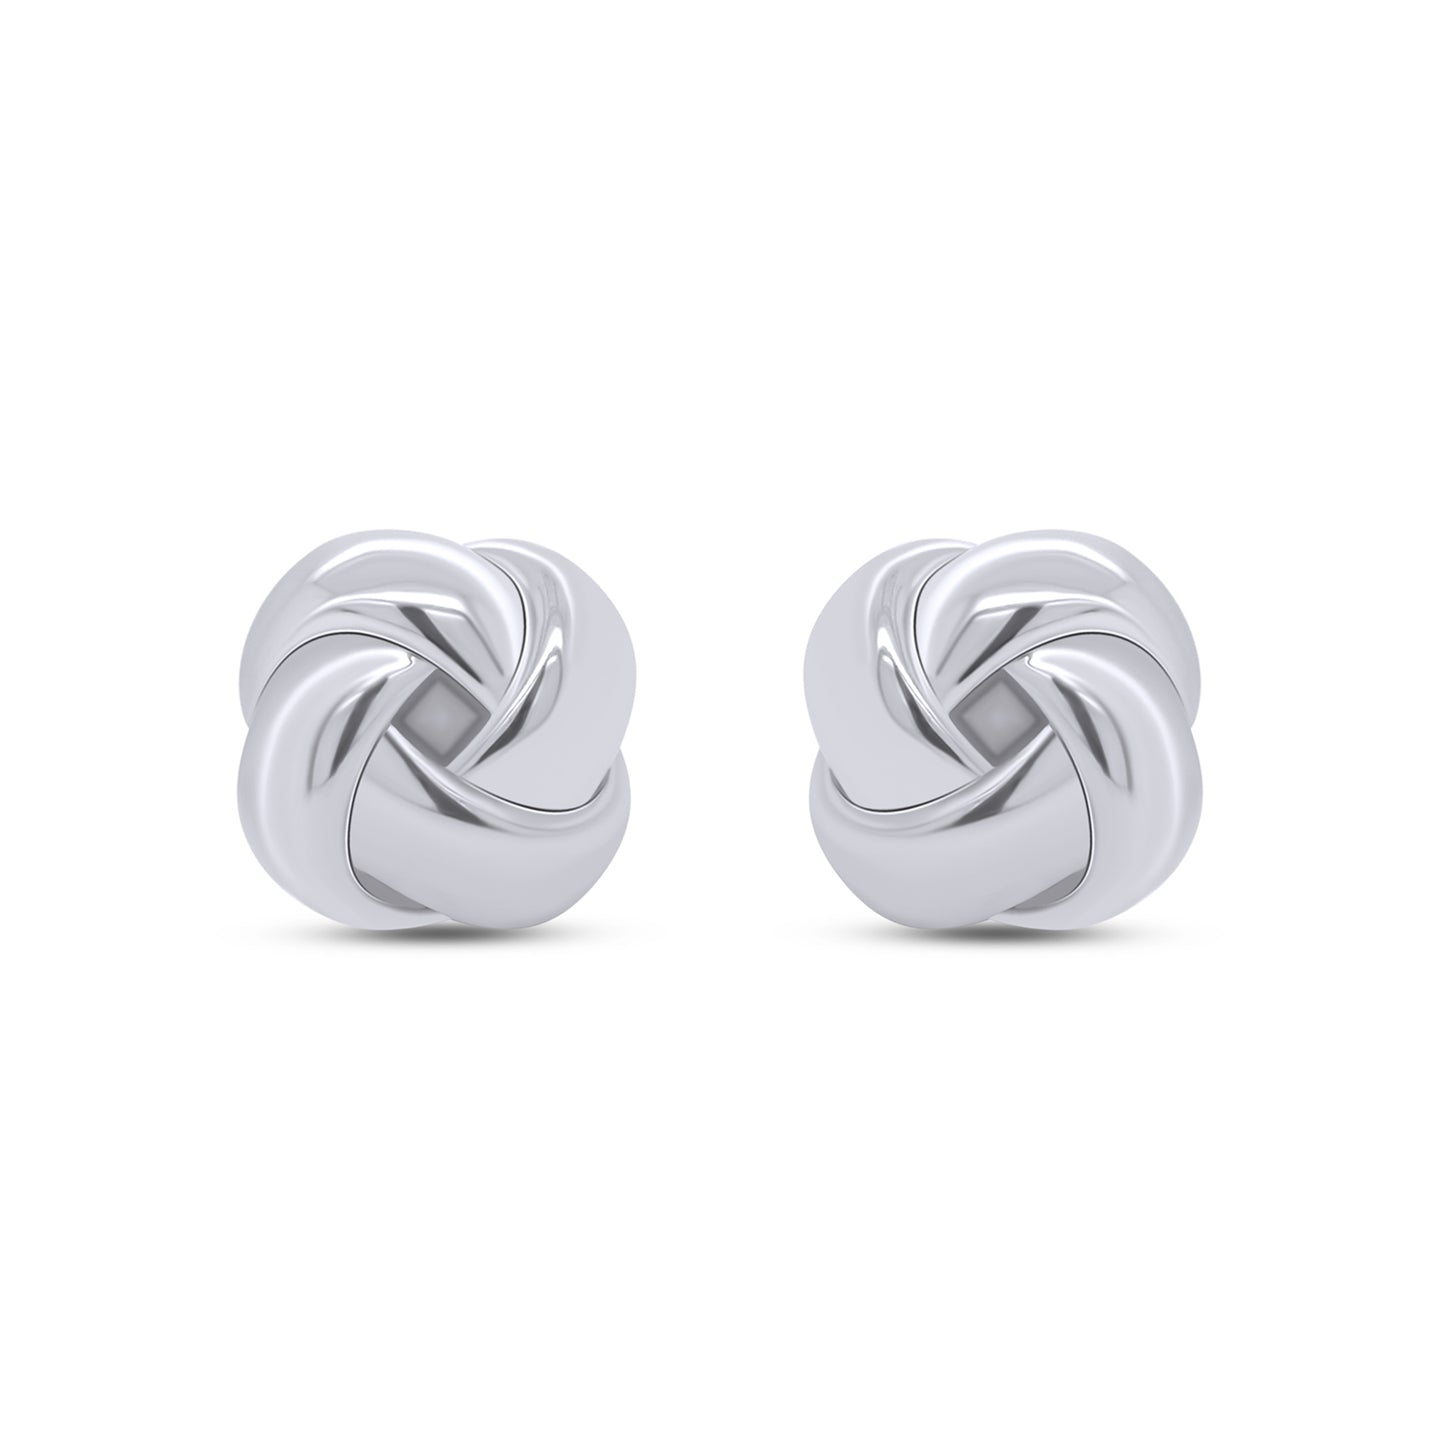 Love Knot Stud Earrings Jewelry for Women in 925 Sterling Silver with Push Back